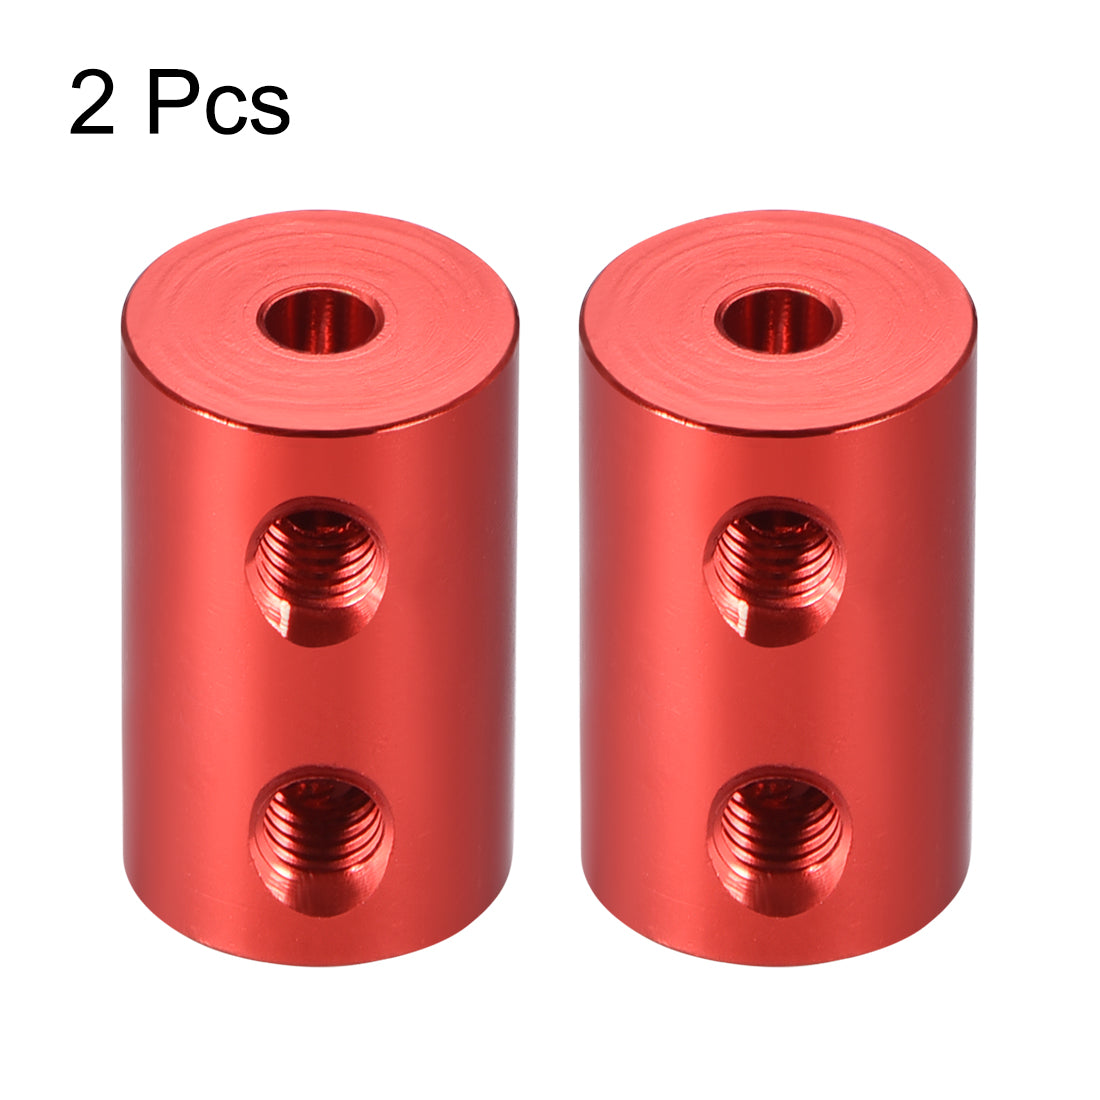 uxcell Uxcell Shaft Coupling 3.17mm to 3.17mm Bore L20xD12 Robot Motor Wheel Rigid Coupler Connector Red 2 Pcs